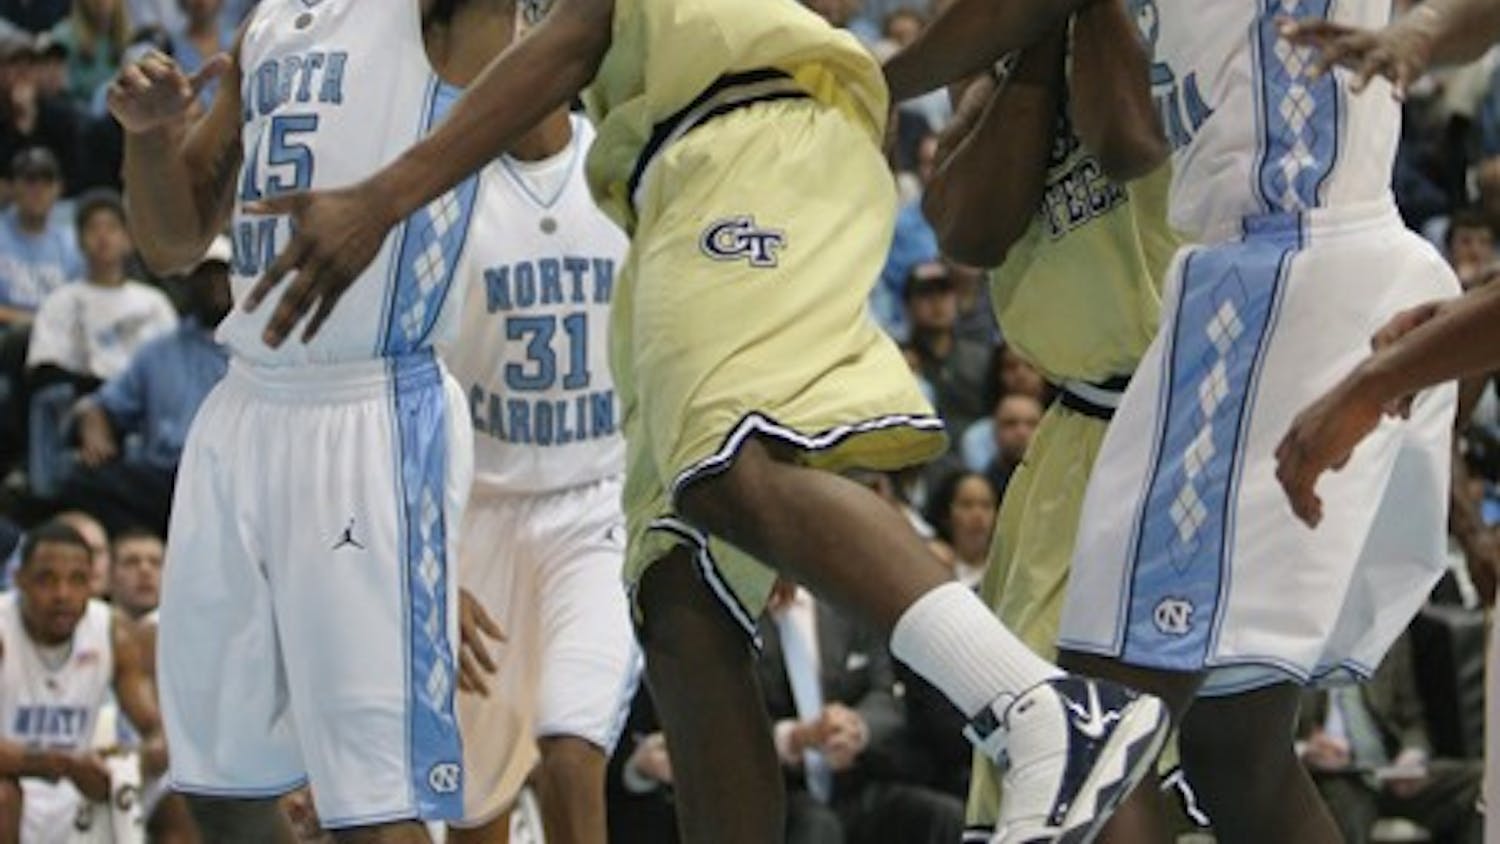 Georgia Tech guard Iman Shumpert torched UNC’s defense for a career-high 30 points. DTH/Margaret Cheatham Williams